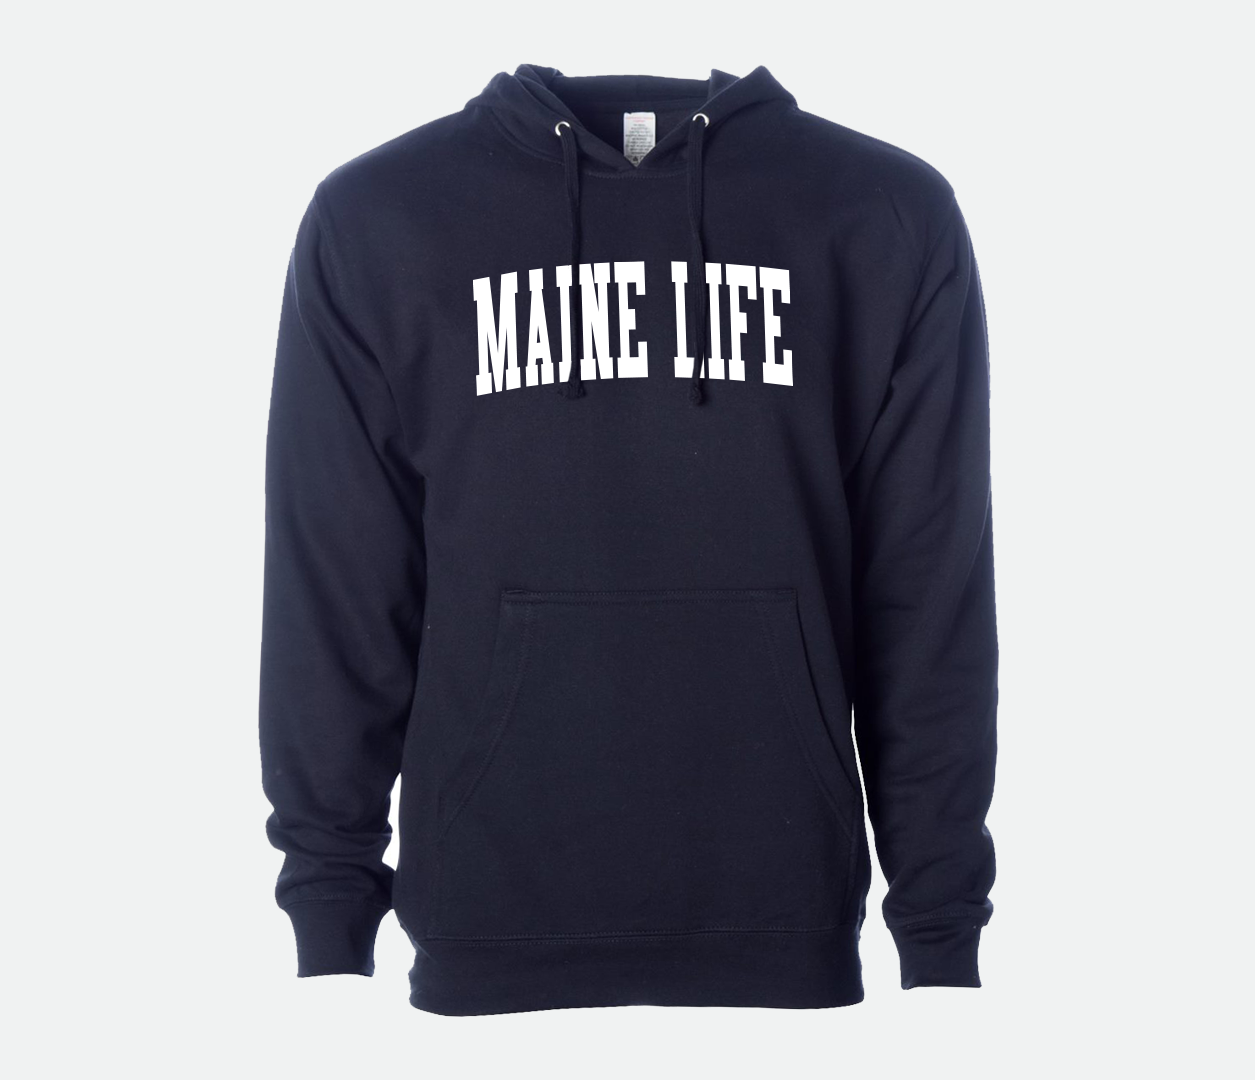 Red sweatshirt with Maine Life wrtitten across the front